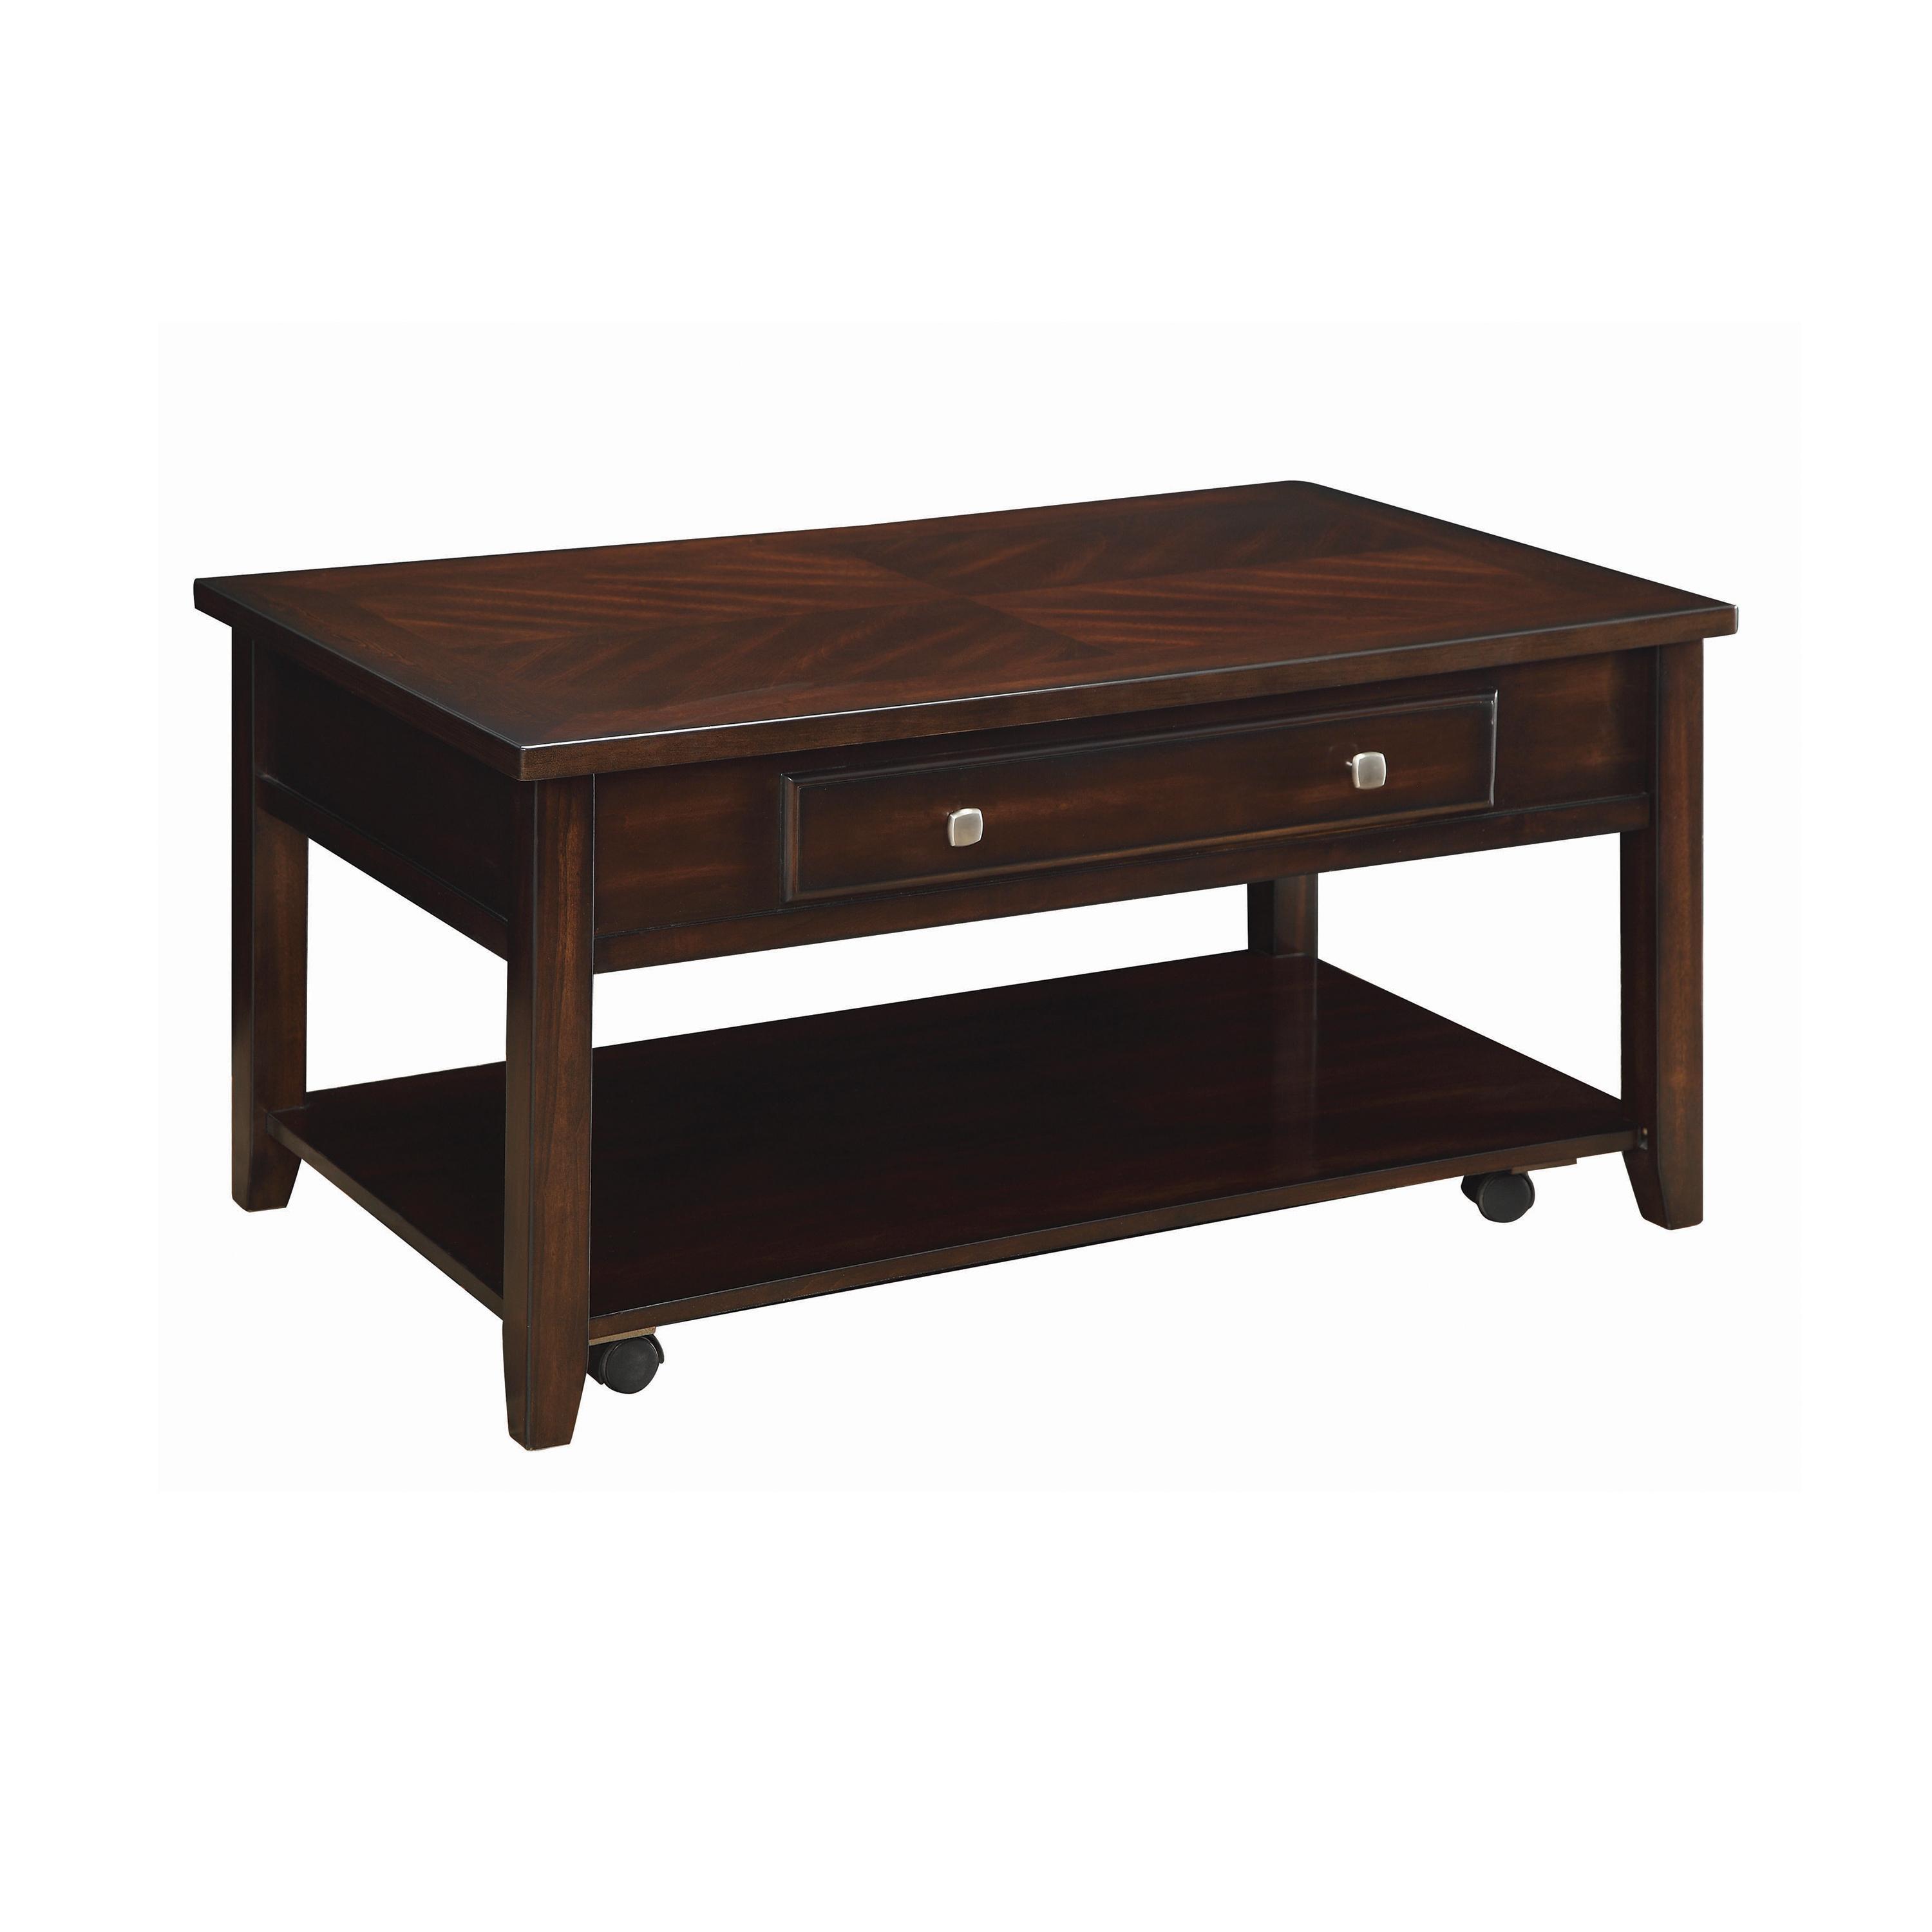 Transitional Coffee Table 721038 721038 in Walnut 